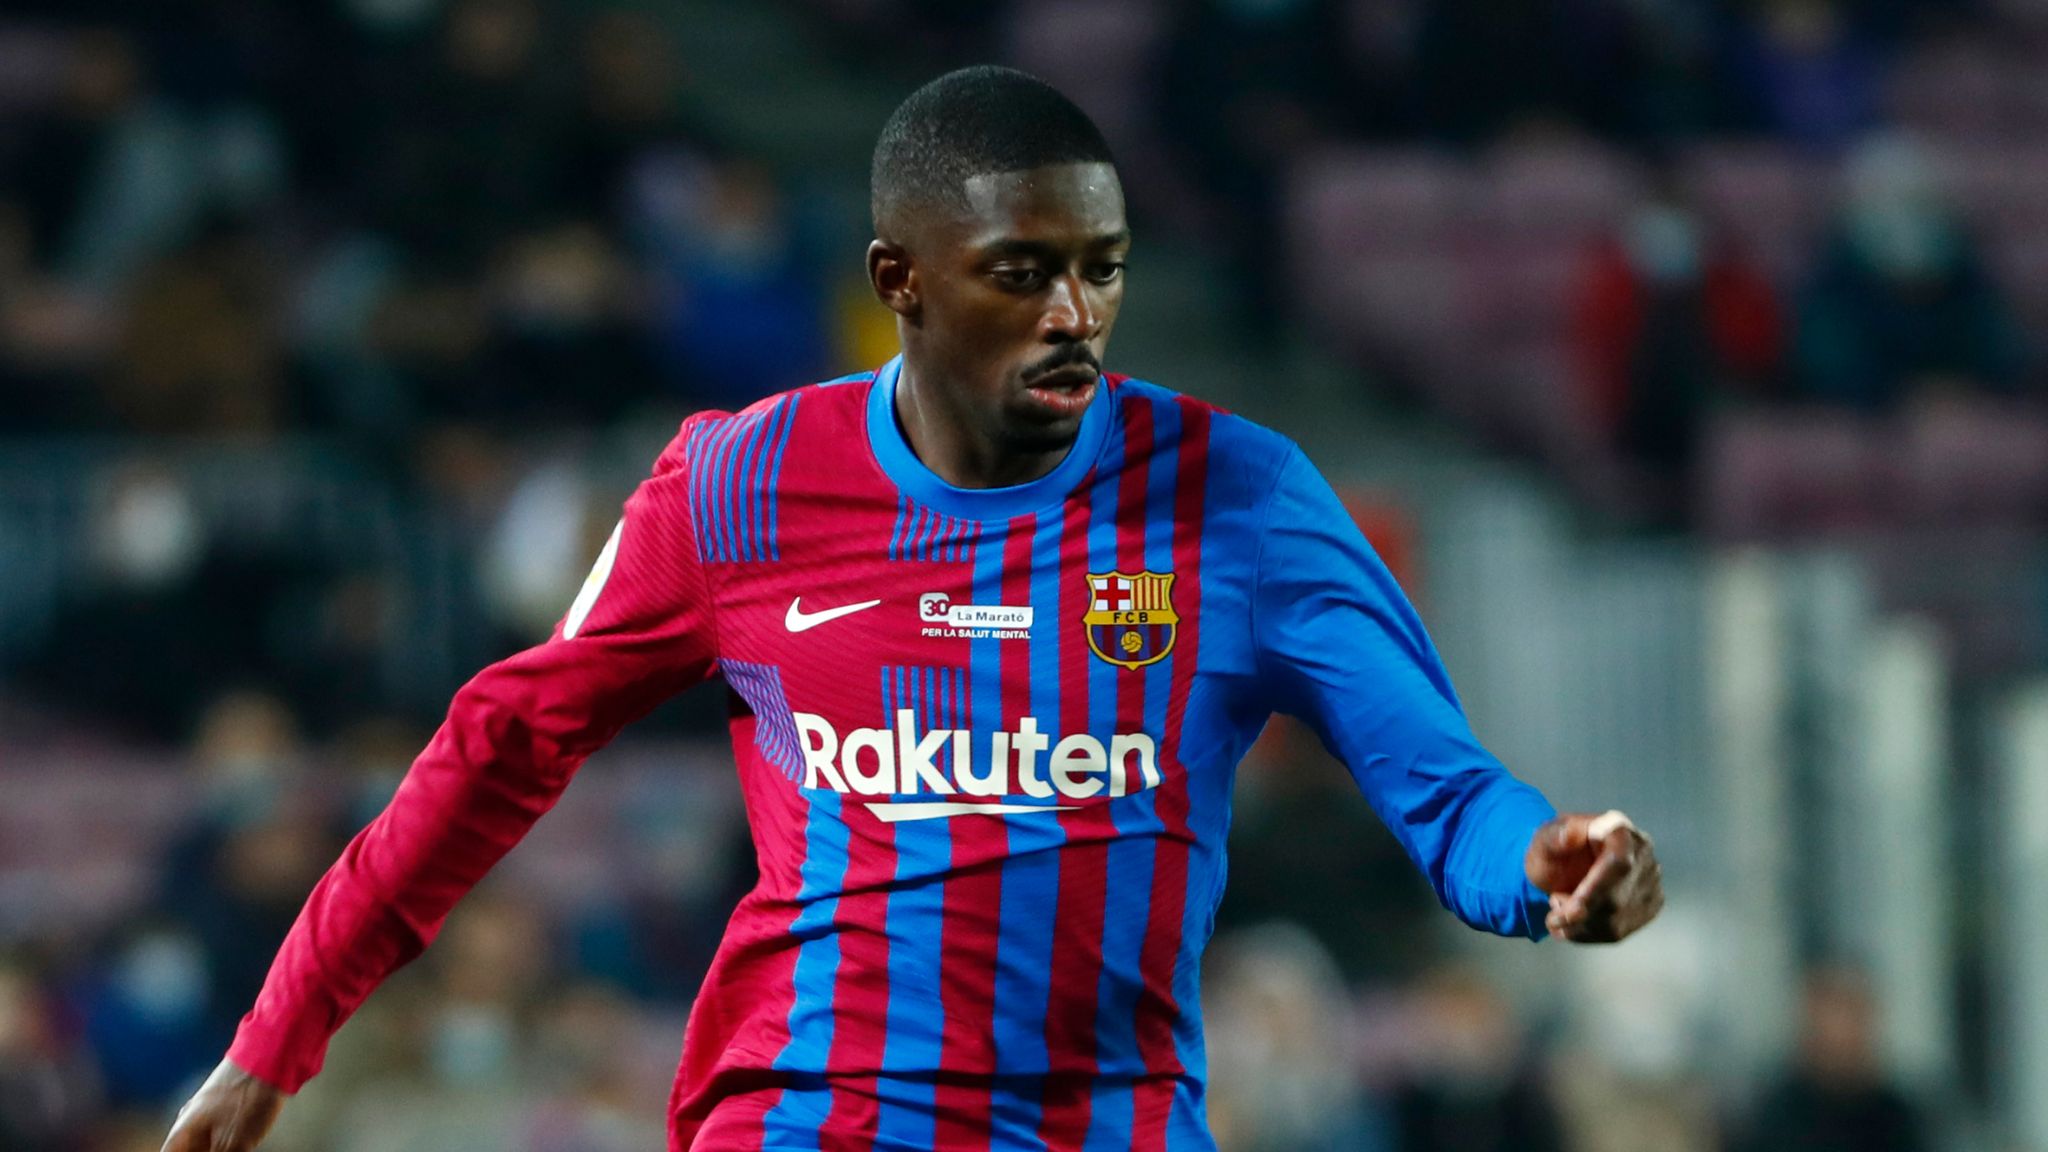 PSG and Manchester United are in contact with Barcelona star Ousmane Dembele